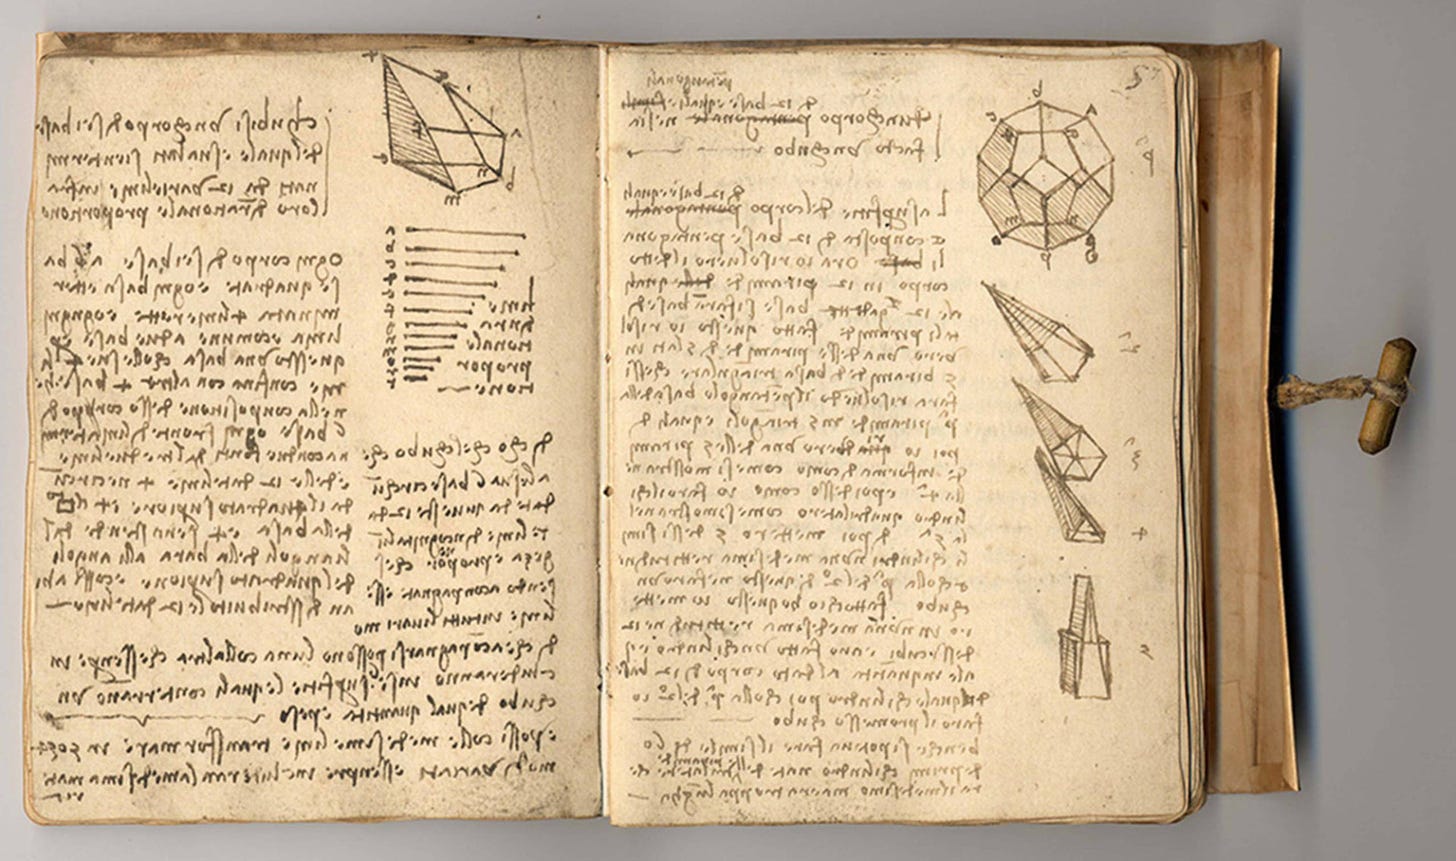 Codex Forster II, Leonardo da Vinci, late 15th – early 16th century, Italy. Museum no. Forster MS.141. © Victoria and Albert Museum, London